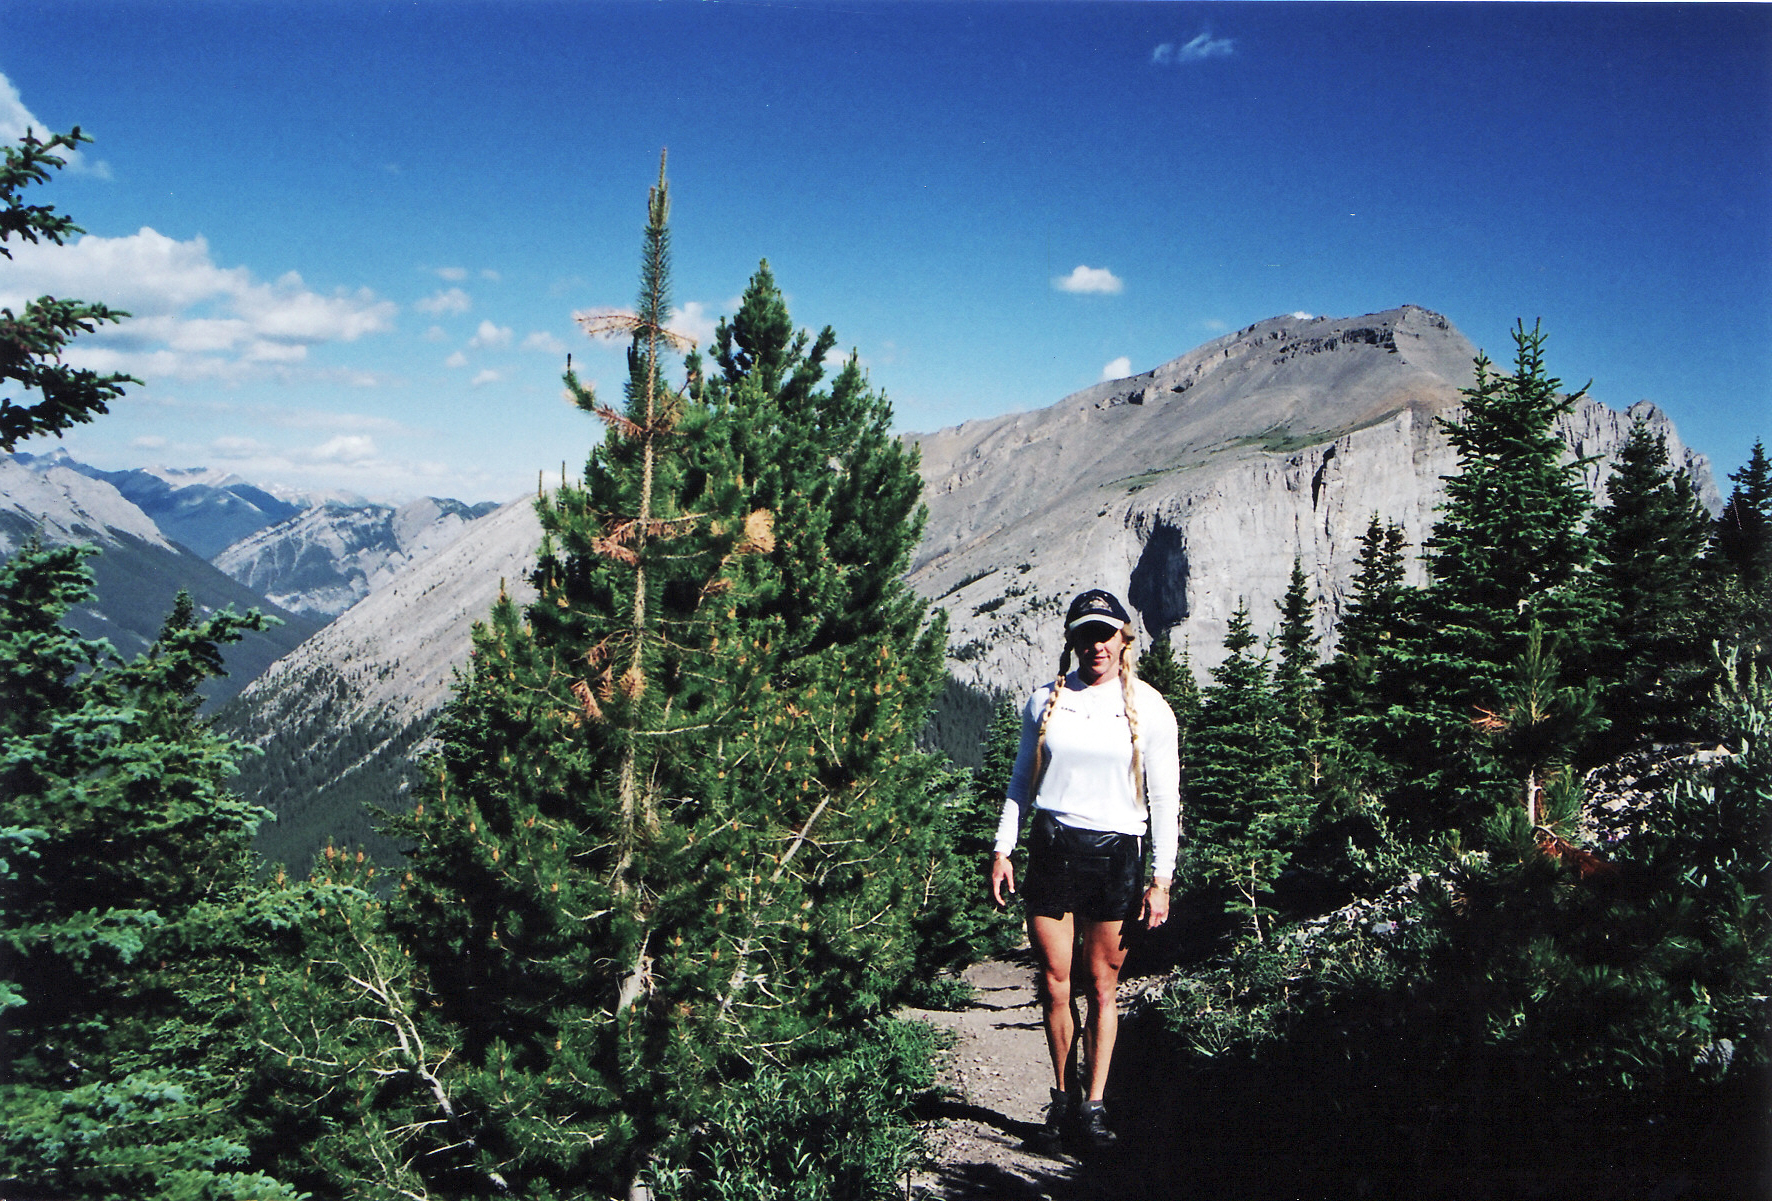 Crista Videriksen Worthy hikes just below the treeline on the trail to Ha Ling Peak in the Canadian Rockies. Photo by Fred Worthy.